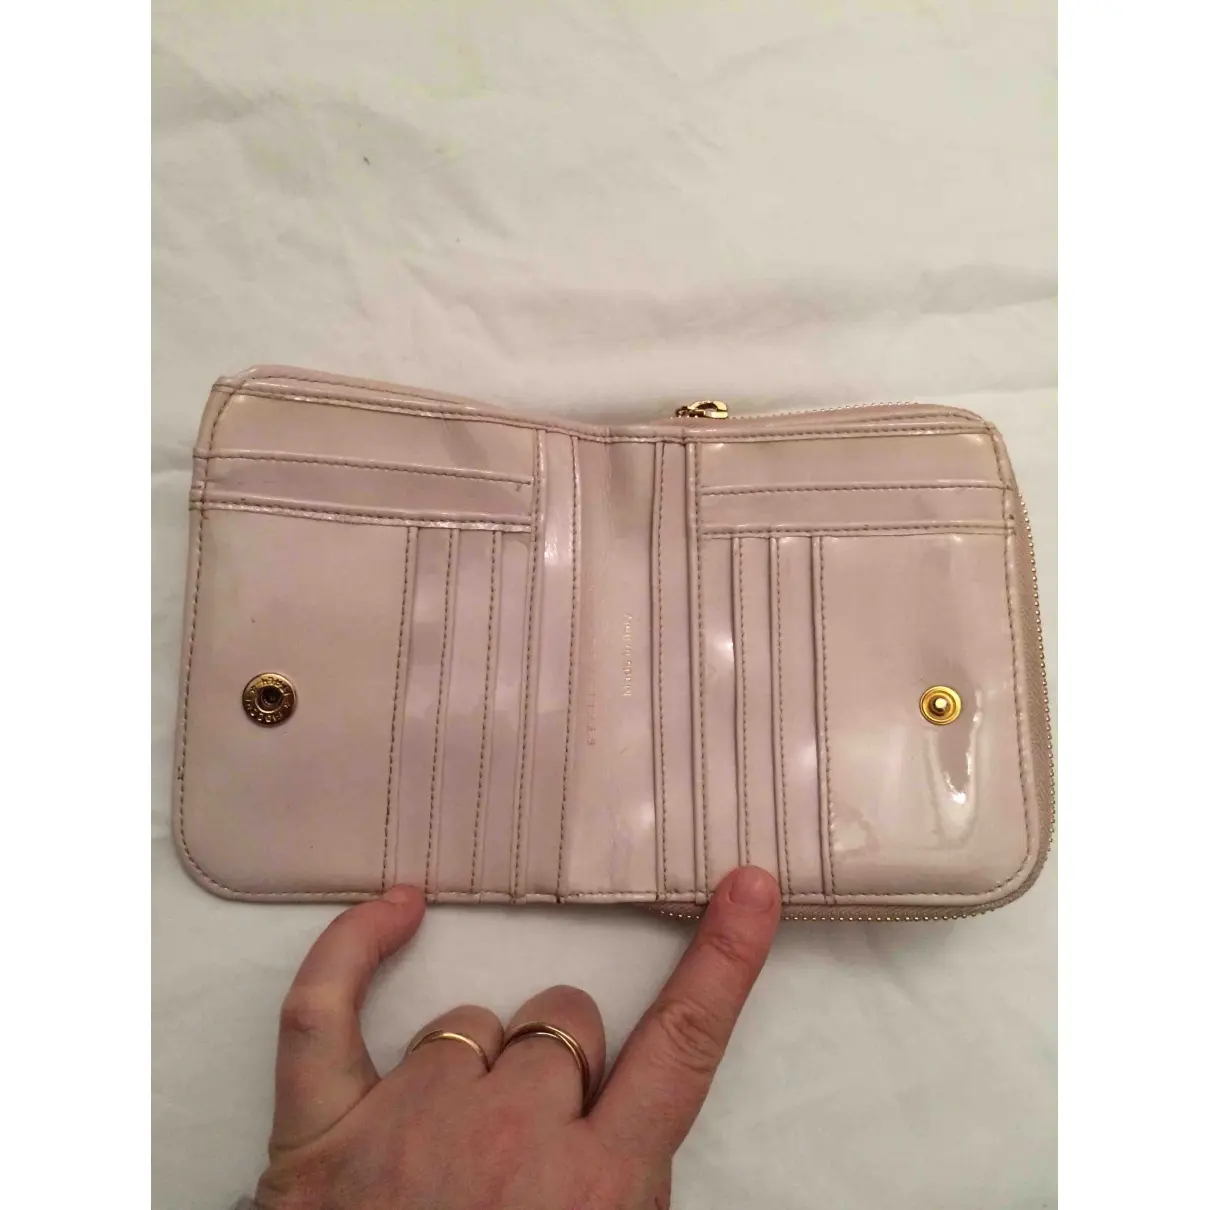 Stella McCartney Patent leather wallet for sale